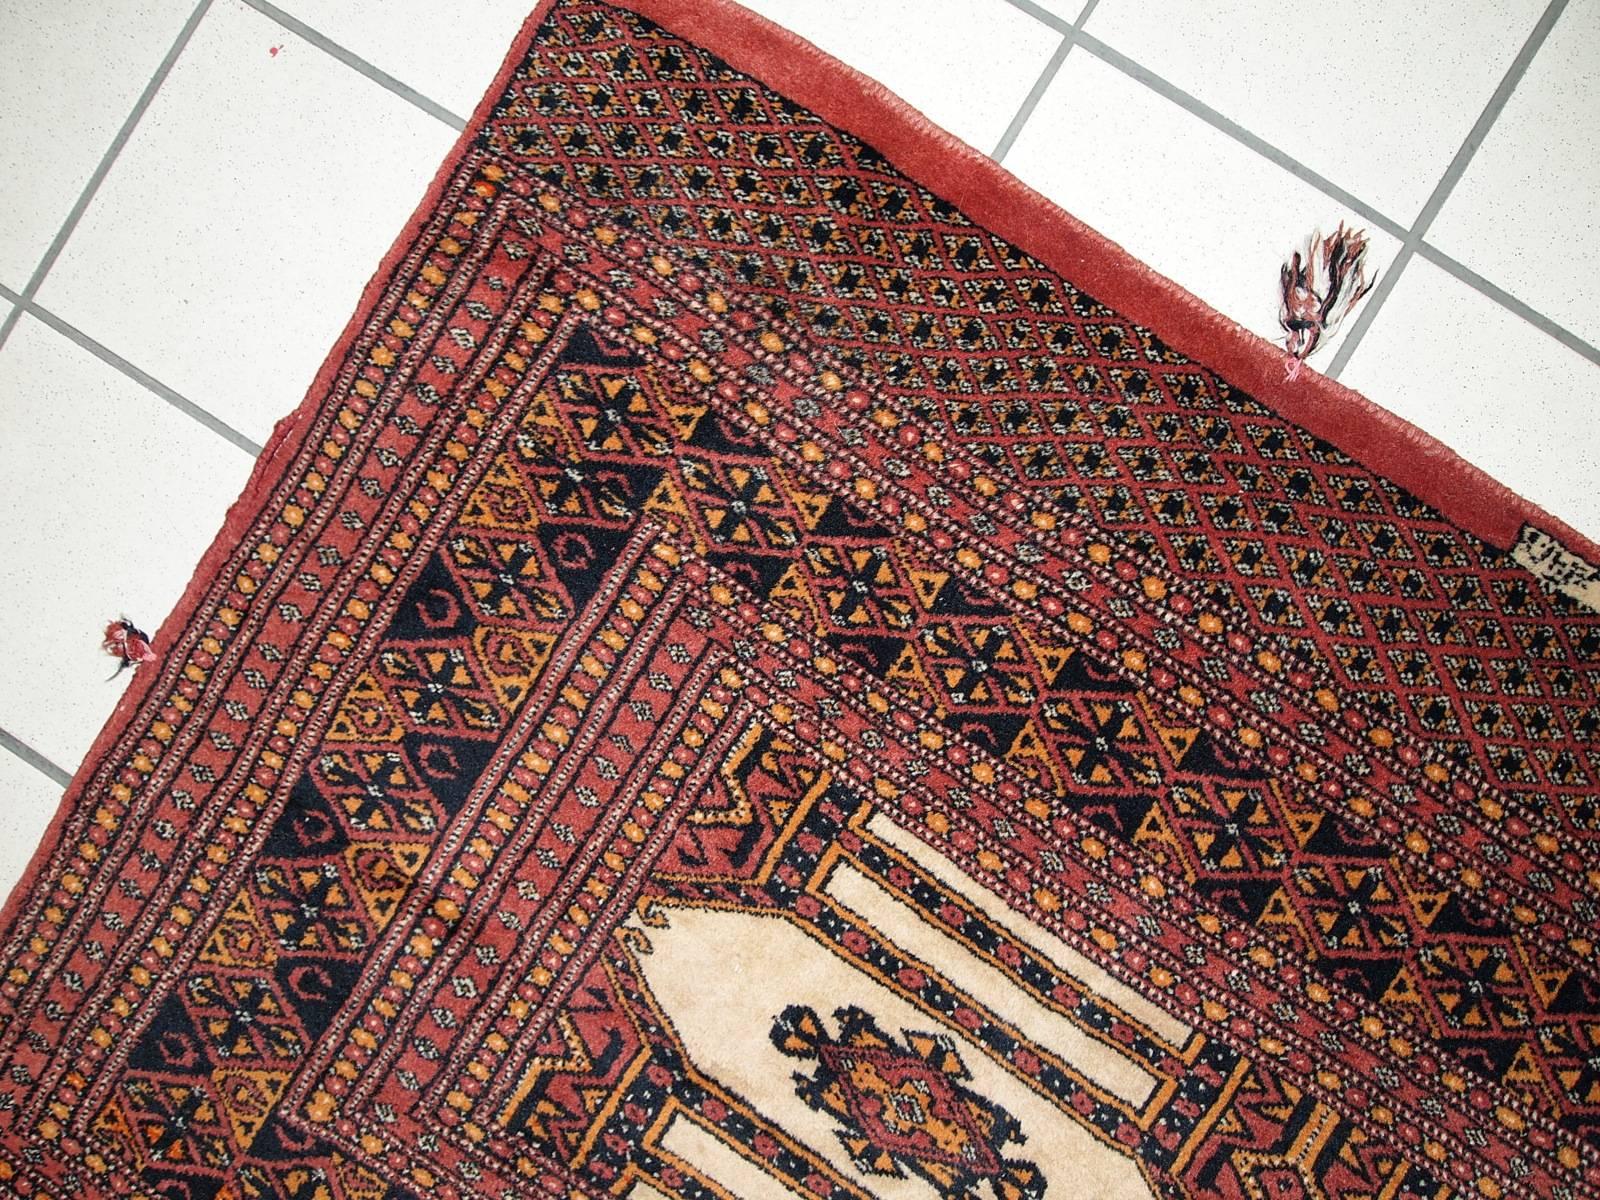 Handmade semi-antique Turkoman rug with beige field and red border. Orange color accented on tribal figures. The pile on this rug is thick, soft and comfortable. Great little piece could warm up and beautifully decorate any small space in the